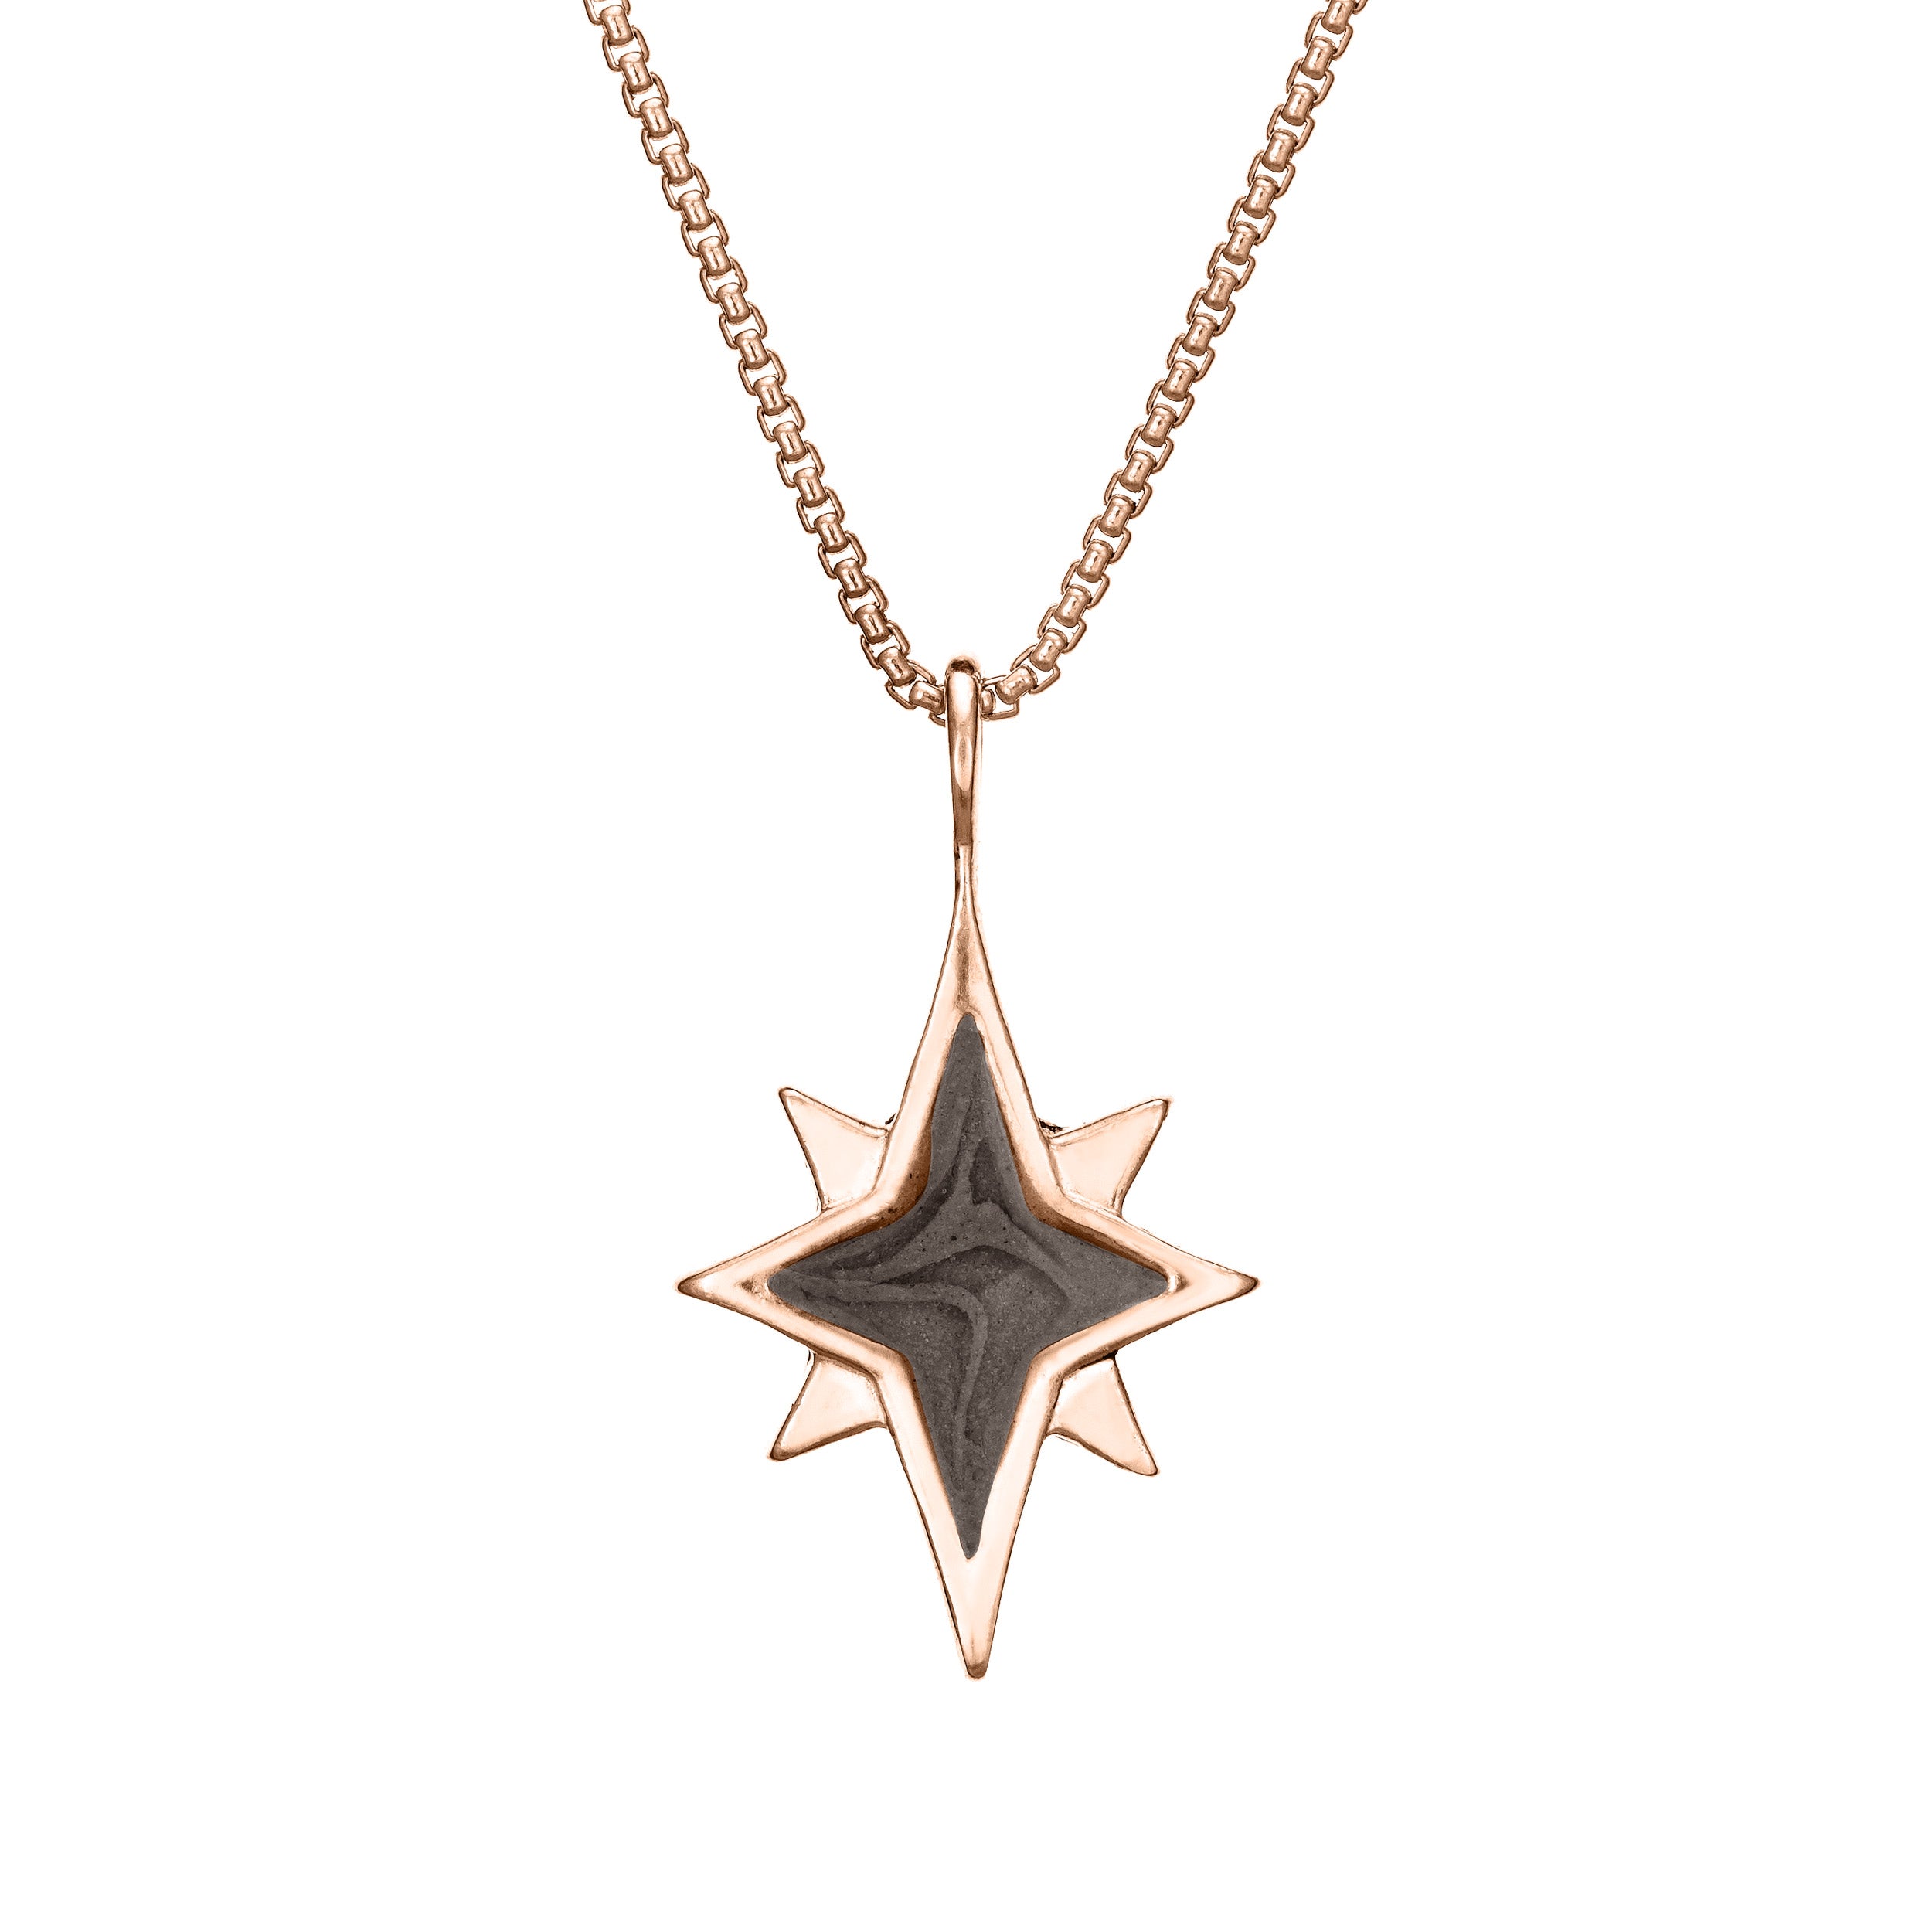 Satin Finish Elegant North Star Pendant Necklace in Gold (Yellow/Rose/White)